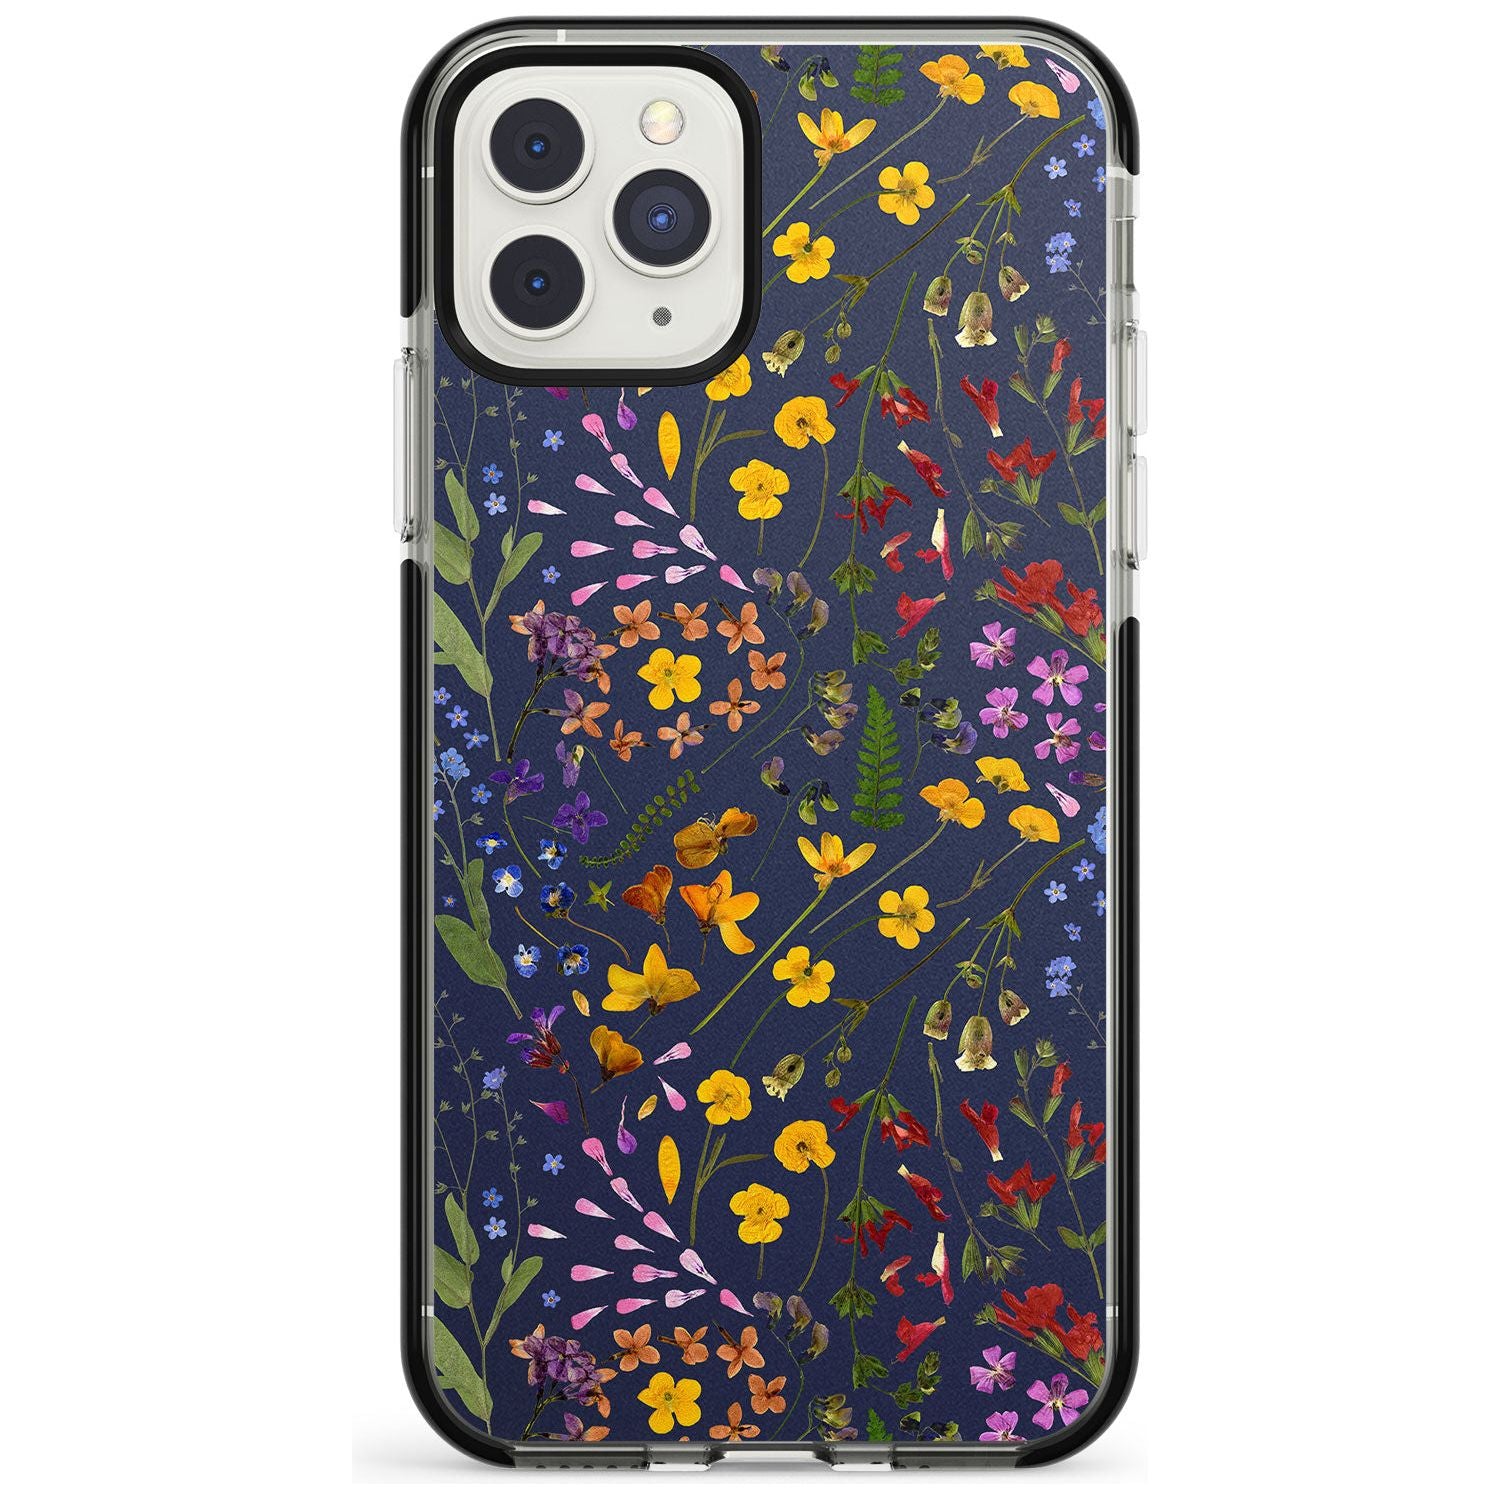 Wildflower & Leaves Cluster Design - Navy Black Impact Phone Case for iPhone 11 Pro Max